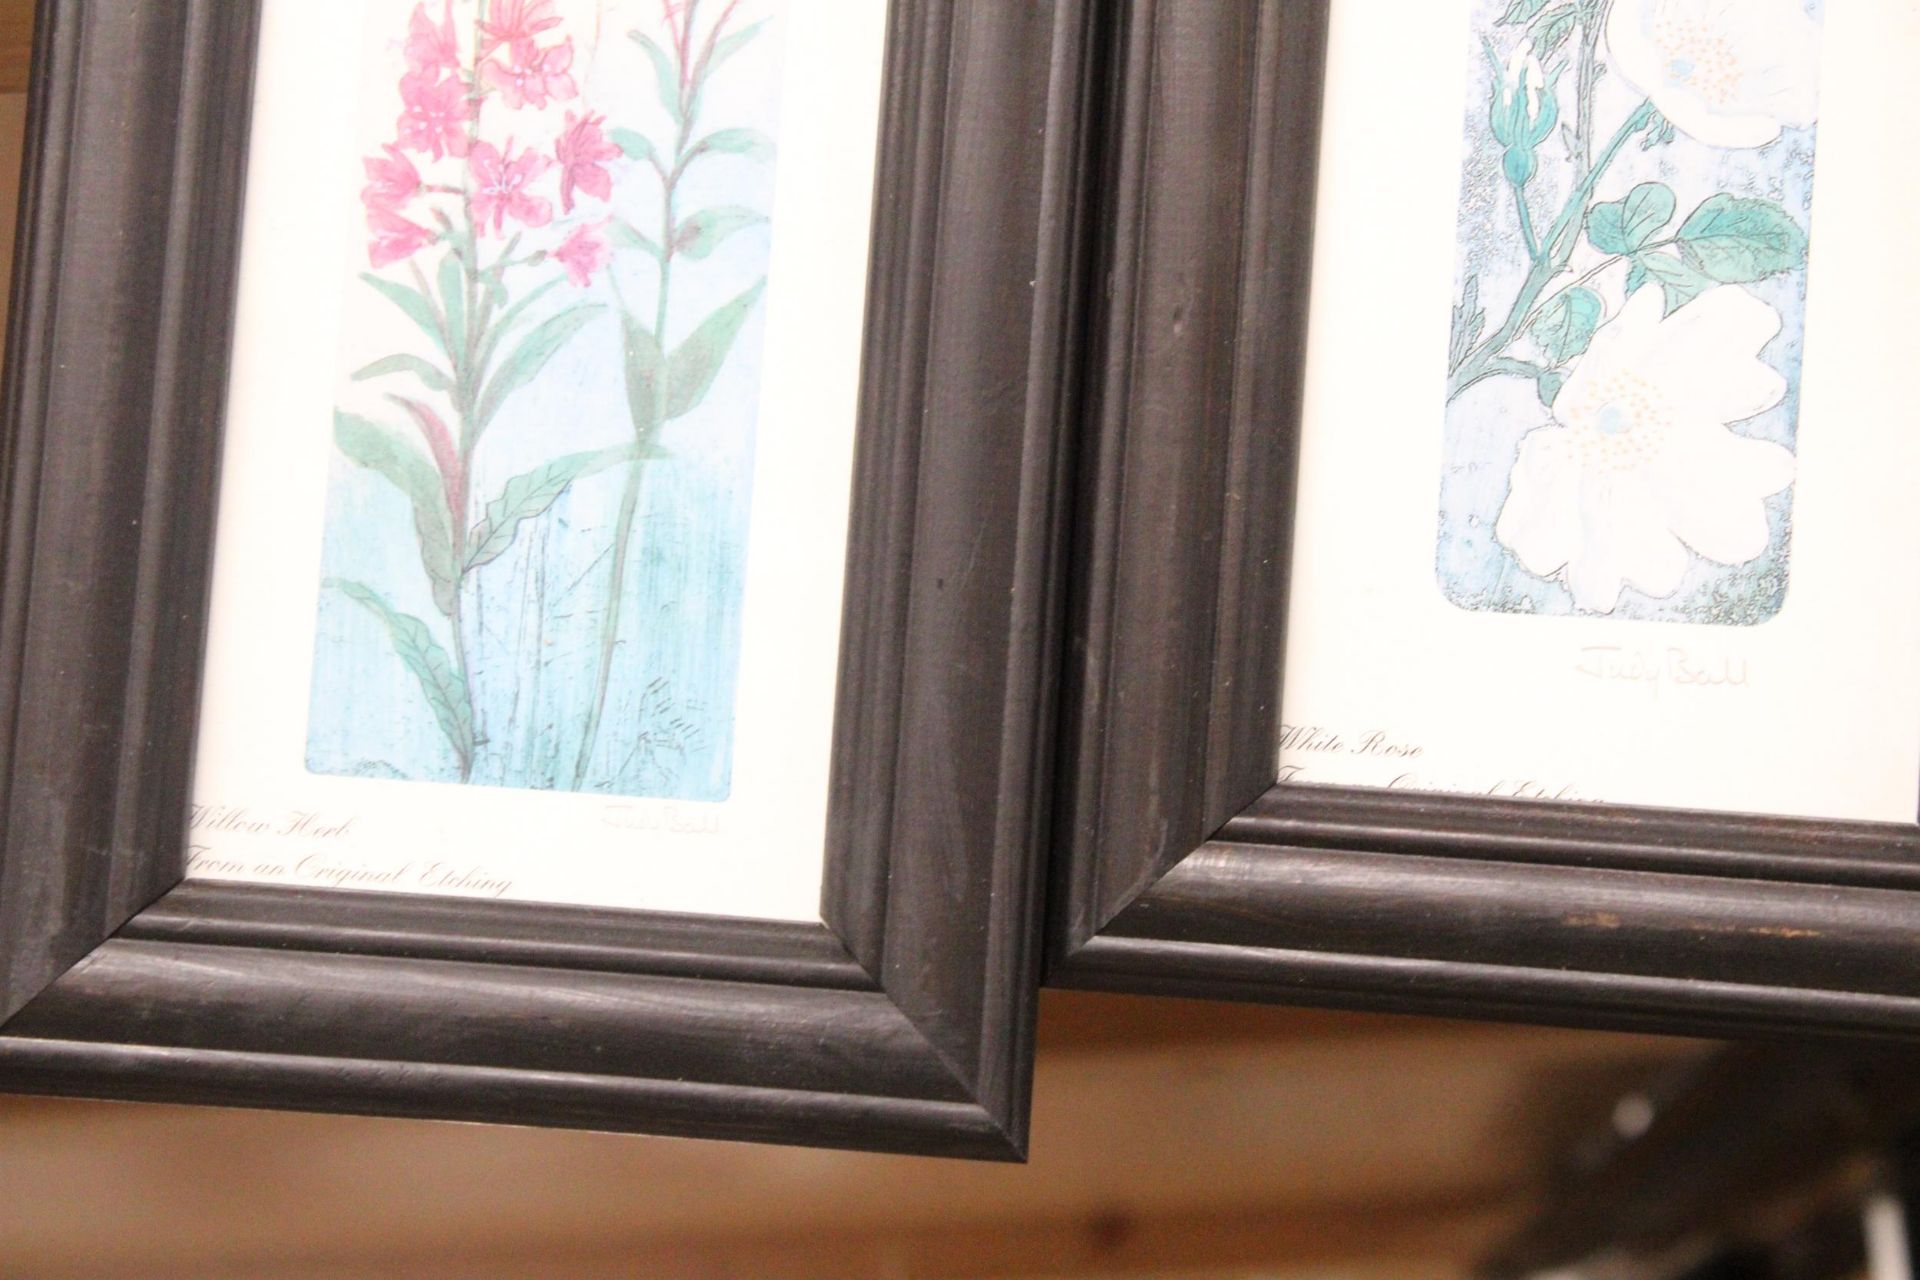 A PAIR OF SMALL FLORAL PRINTS, SIGNED JUDY BALL - Image 4 of 4